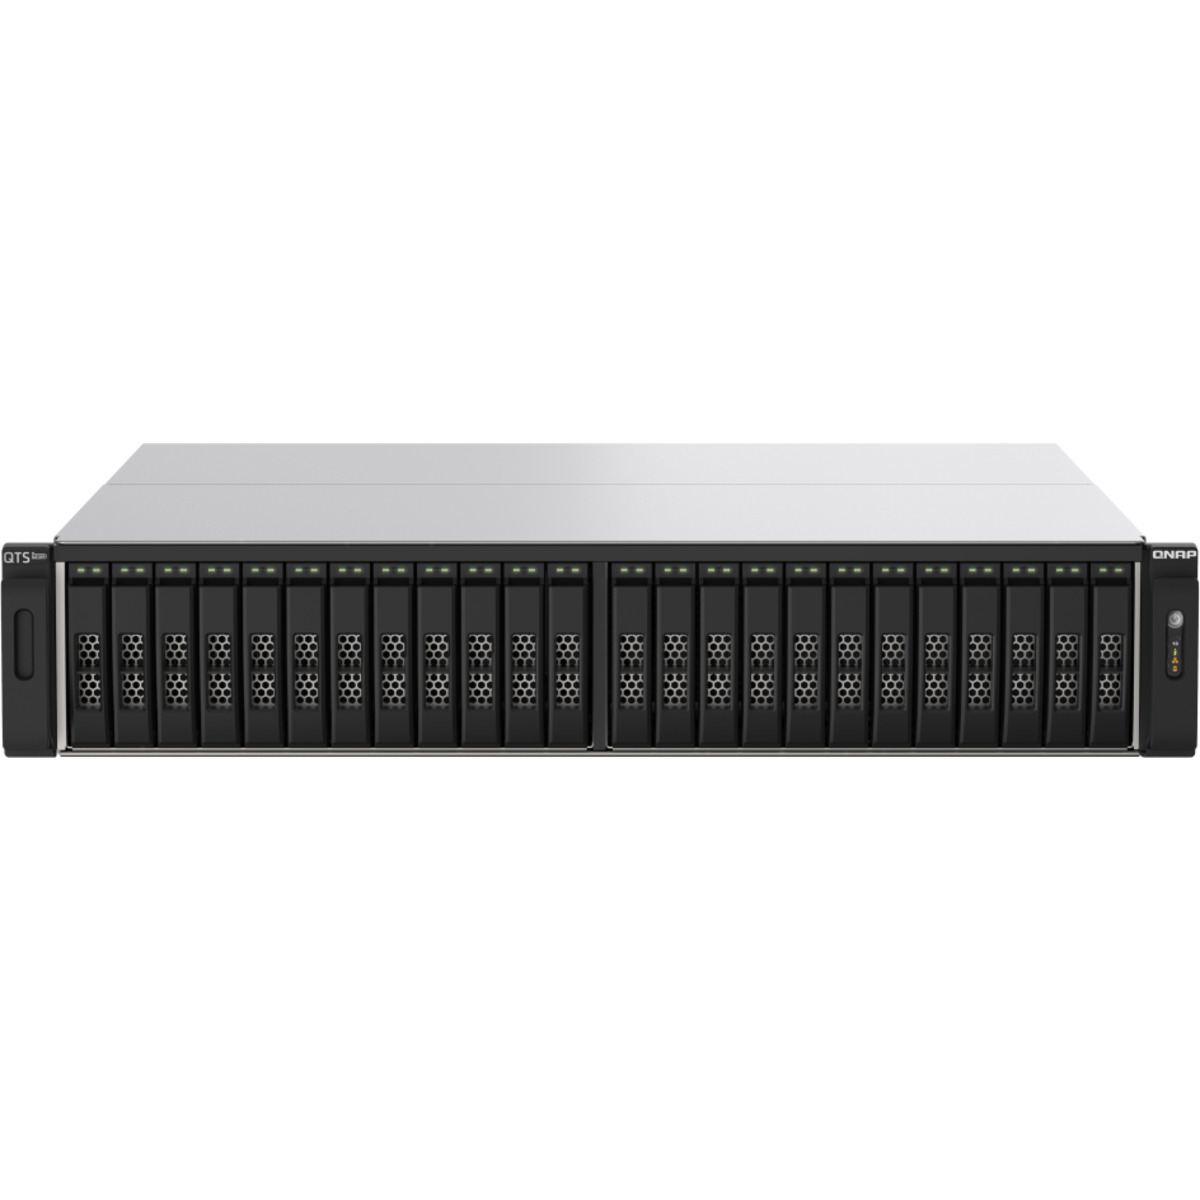 QNAP TS-h2490FU-7232P 11.5tb 24-Bay RackMount Large Business / Enterprise NAS - Network Attached Storage Device 23x500gb Sandisk Plus Series SDSSDA3N-500G  2400/1500MB/s M.2 2280 NVMe SSD CONSUMER Class Drives Installed - Burn-In Tested TS-h2490FU-7232P